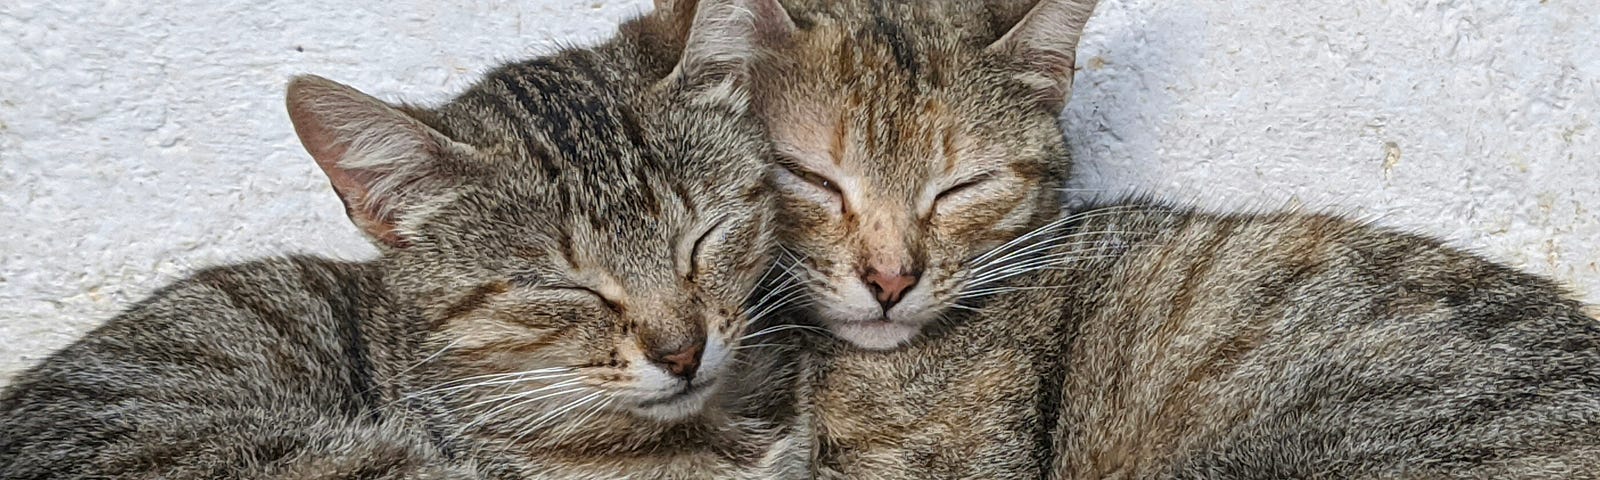 two cats leaning on each other